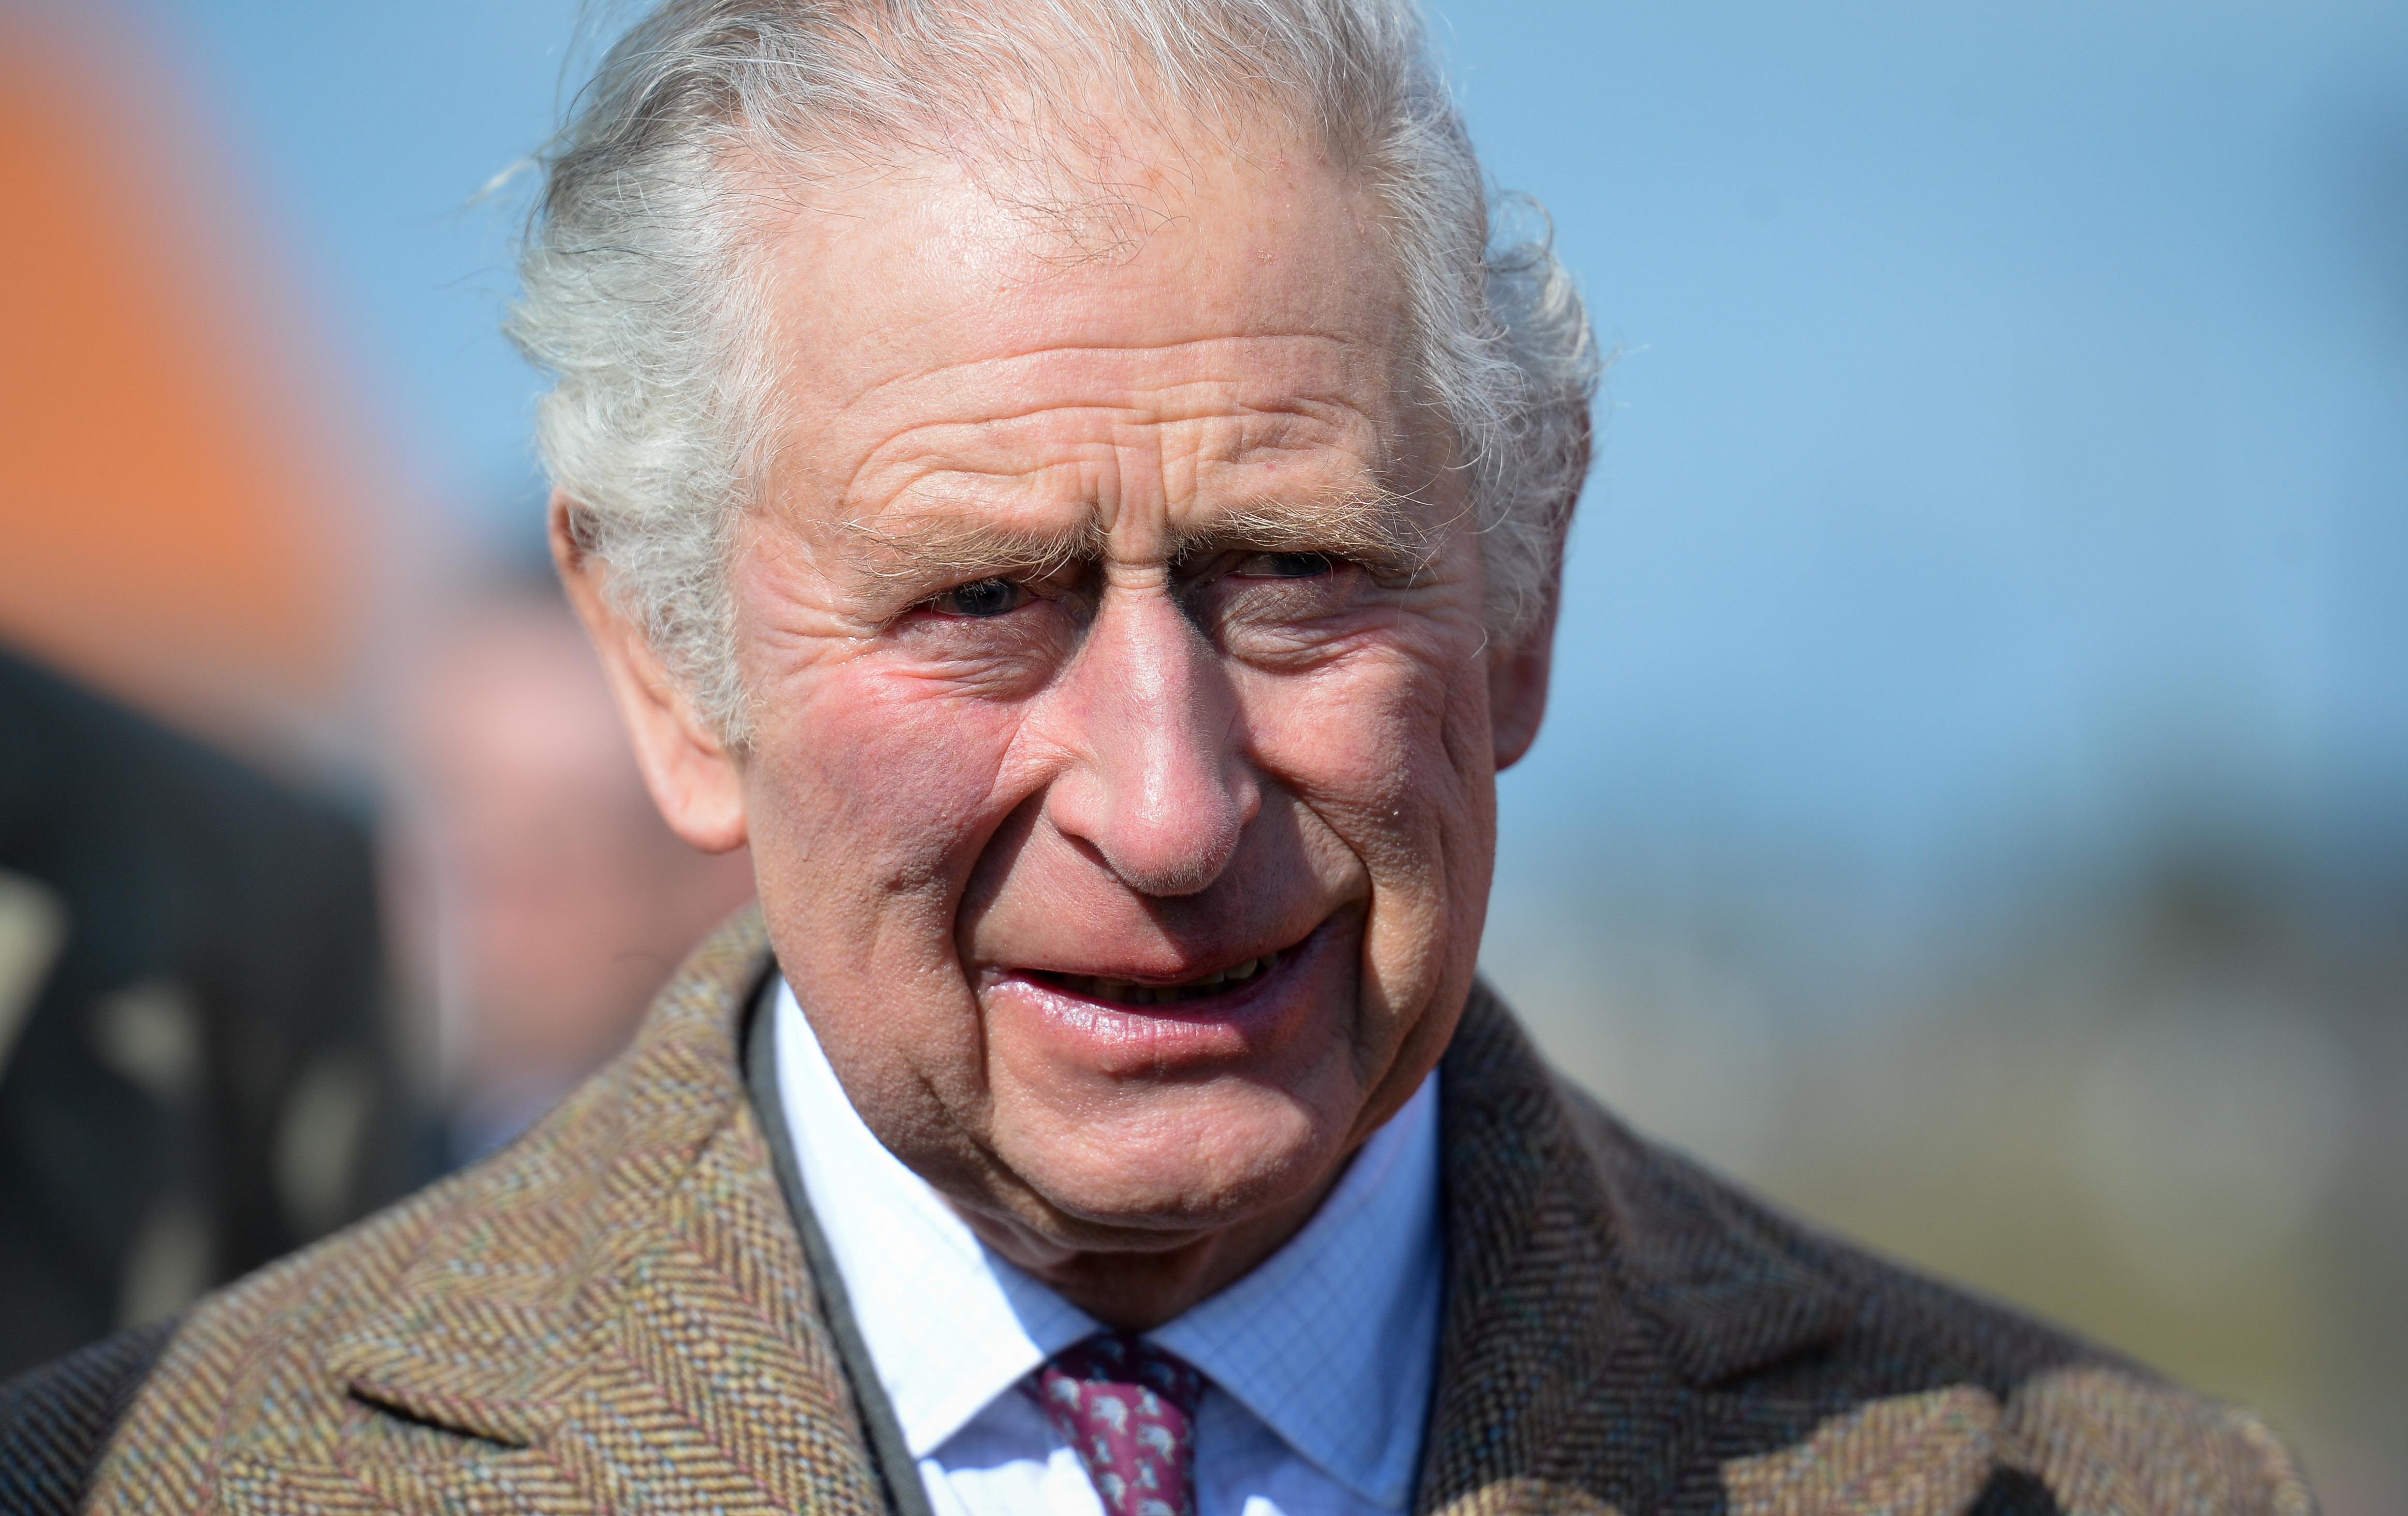 King Charles III during his visit to the Royal British Legion Centenary Wood on March 07, 2022 in Newquay, England | Source: Getty Images